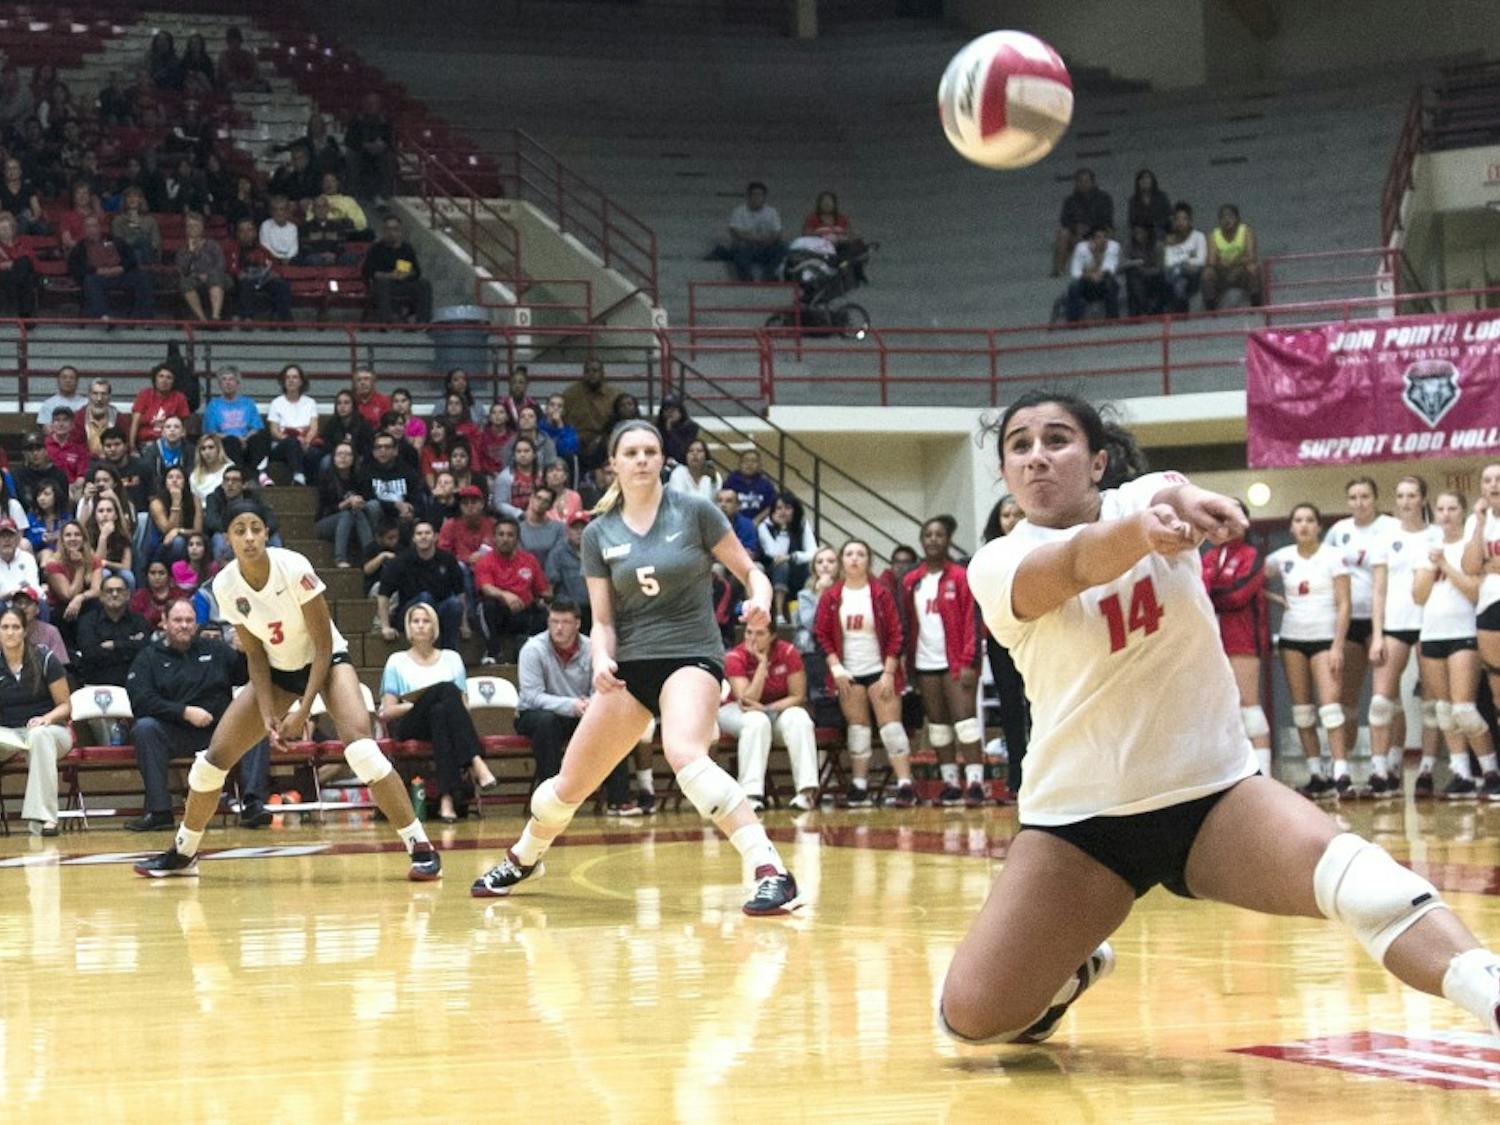 New Mexico defensive specialist Stephanie Chavez bumps the ball during the game against New Mexico State on Monday night. The Lobos swept the Aggies 3-0, snapping a four-match losing streak.